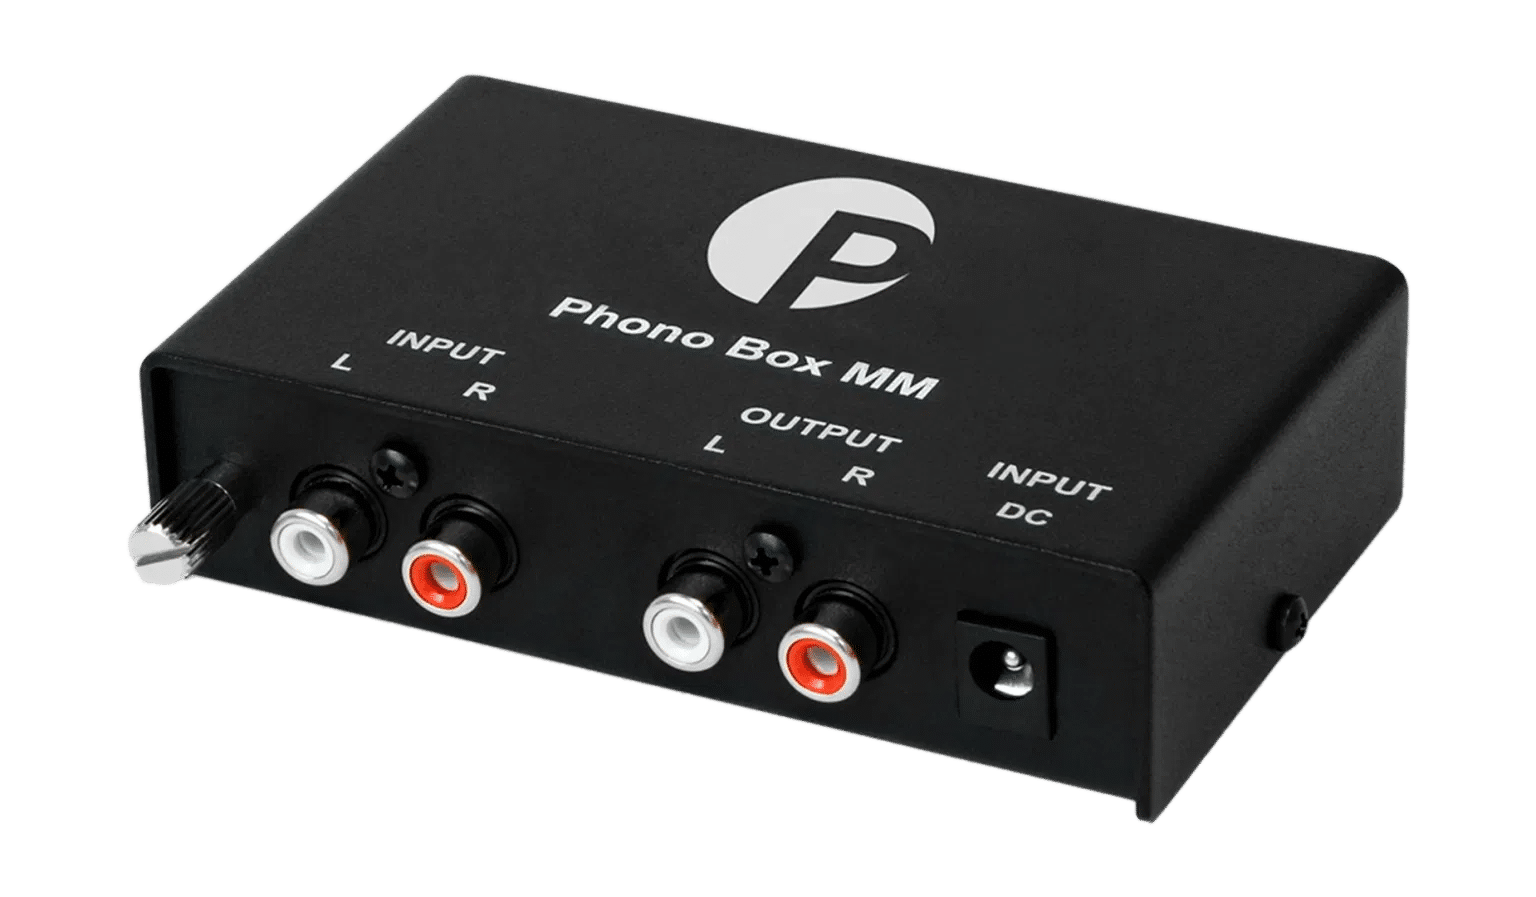 BUYERS GUIDE: PHONO AMPLIFIER GUIDE FOR ALL ON VIDEO